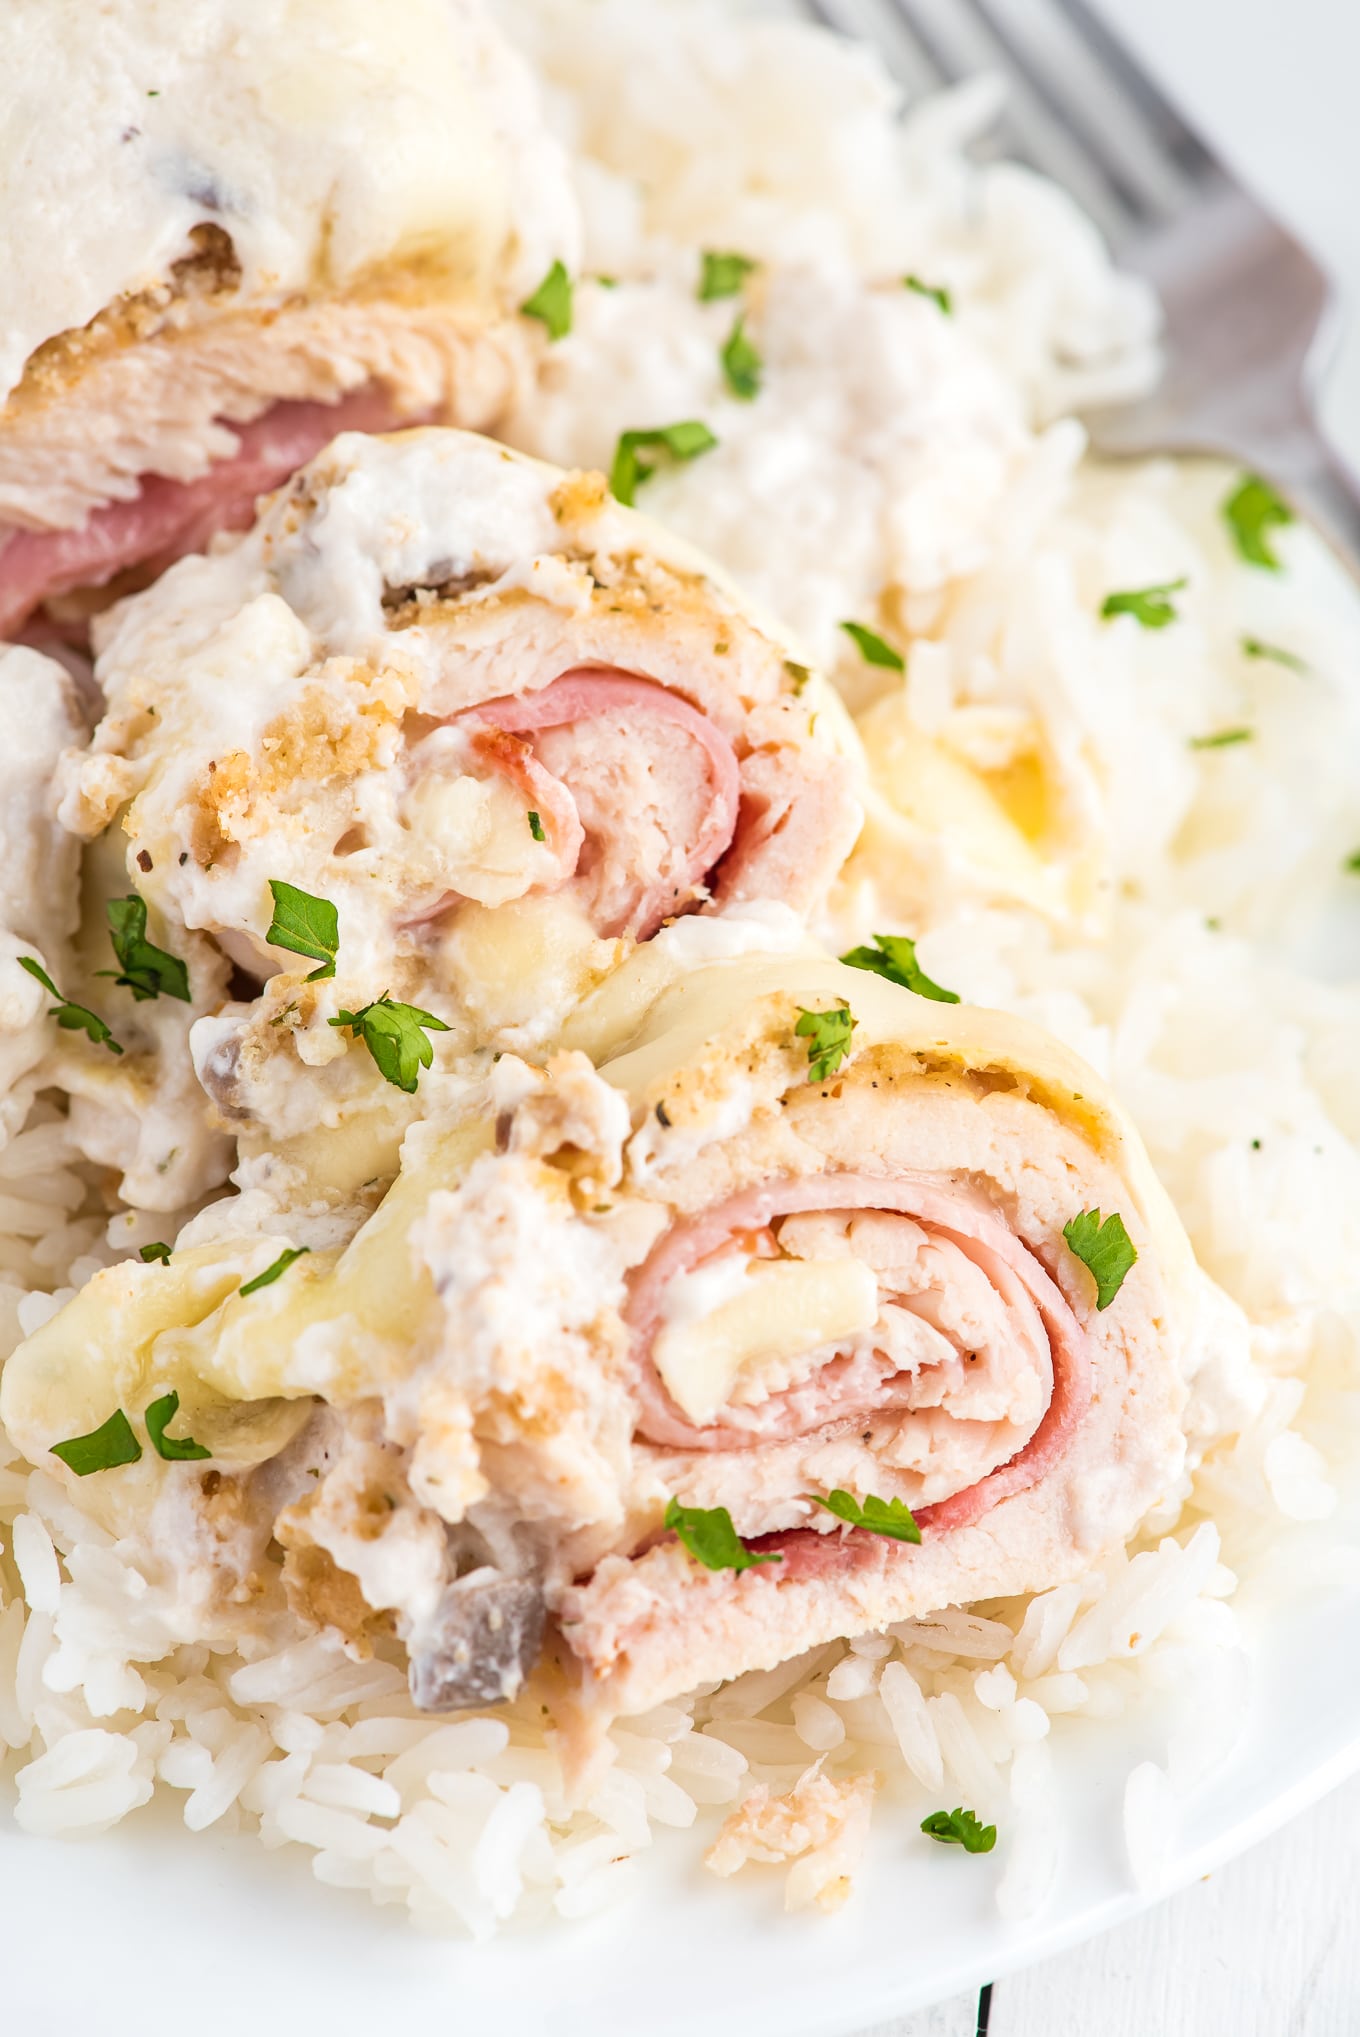 Sliced piece of baked chicken cordon bleu on a plate with rice.